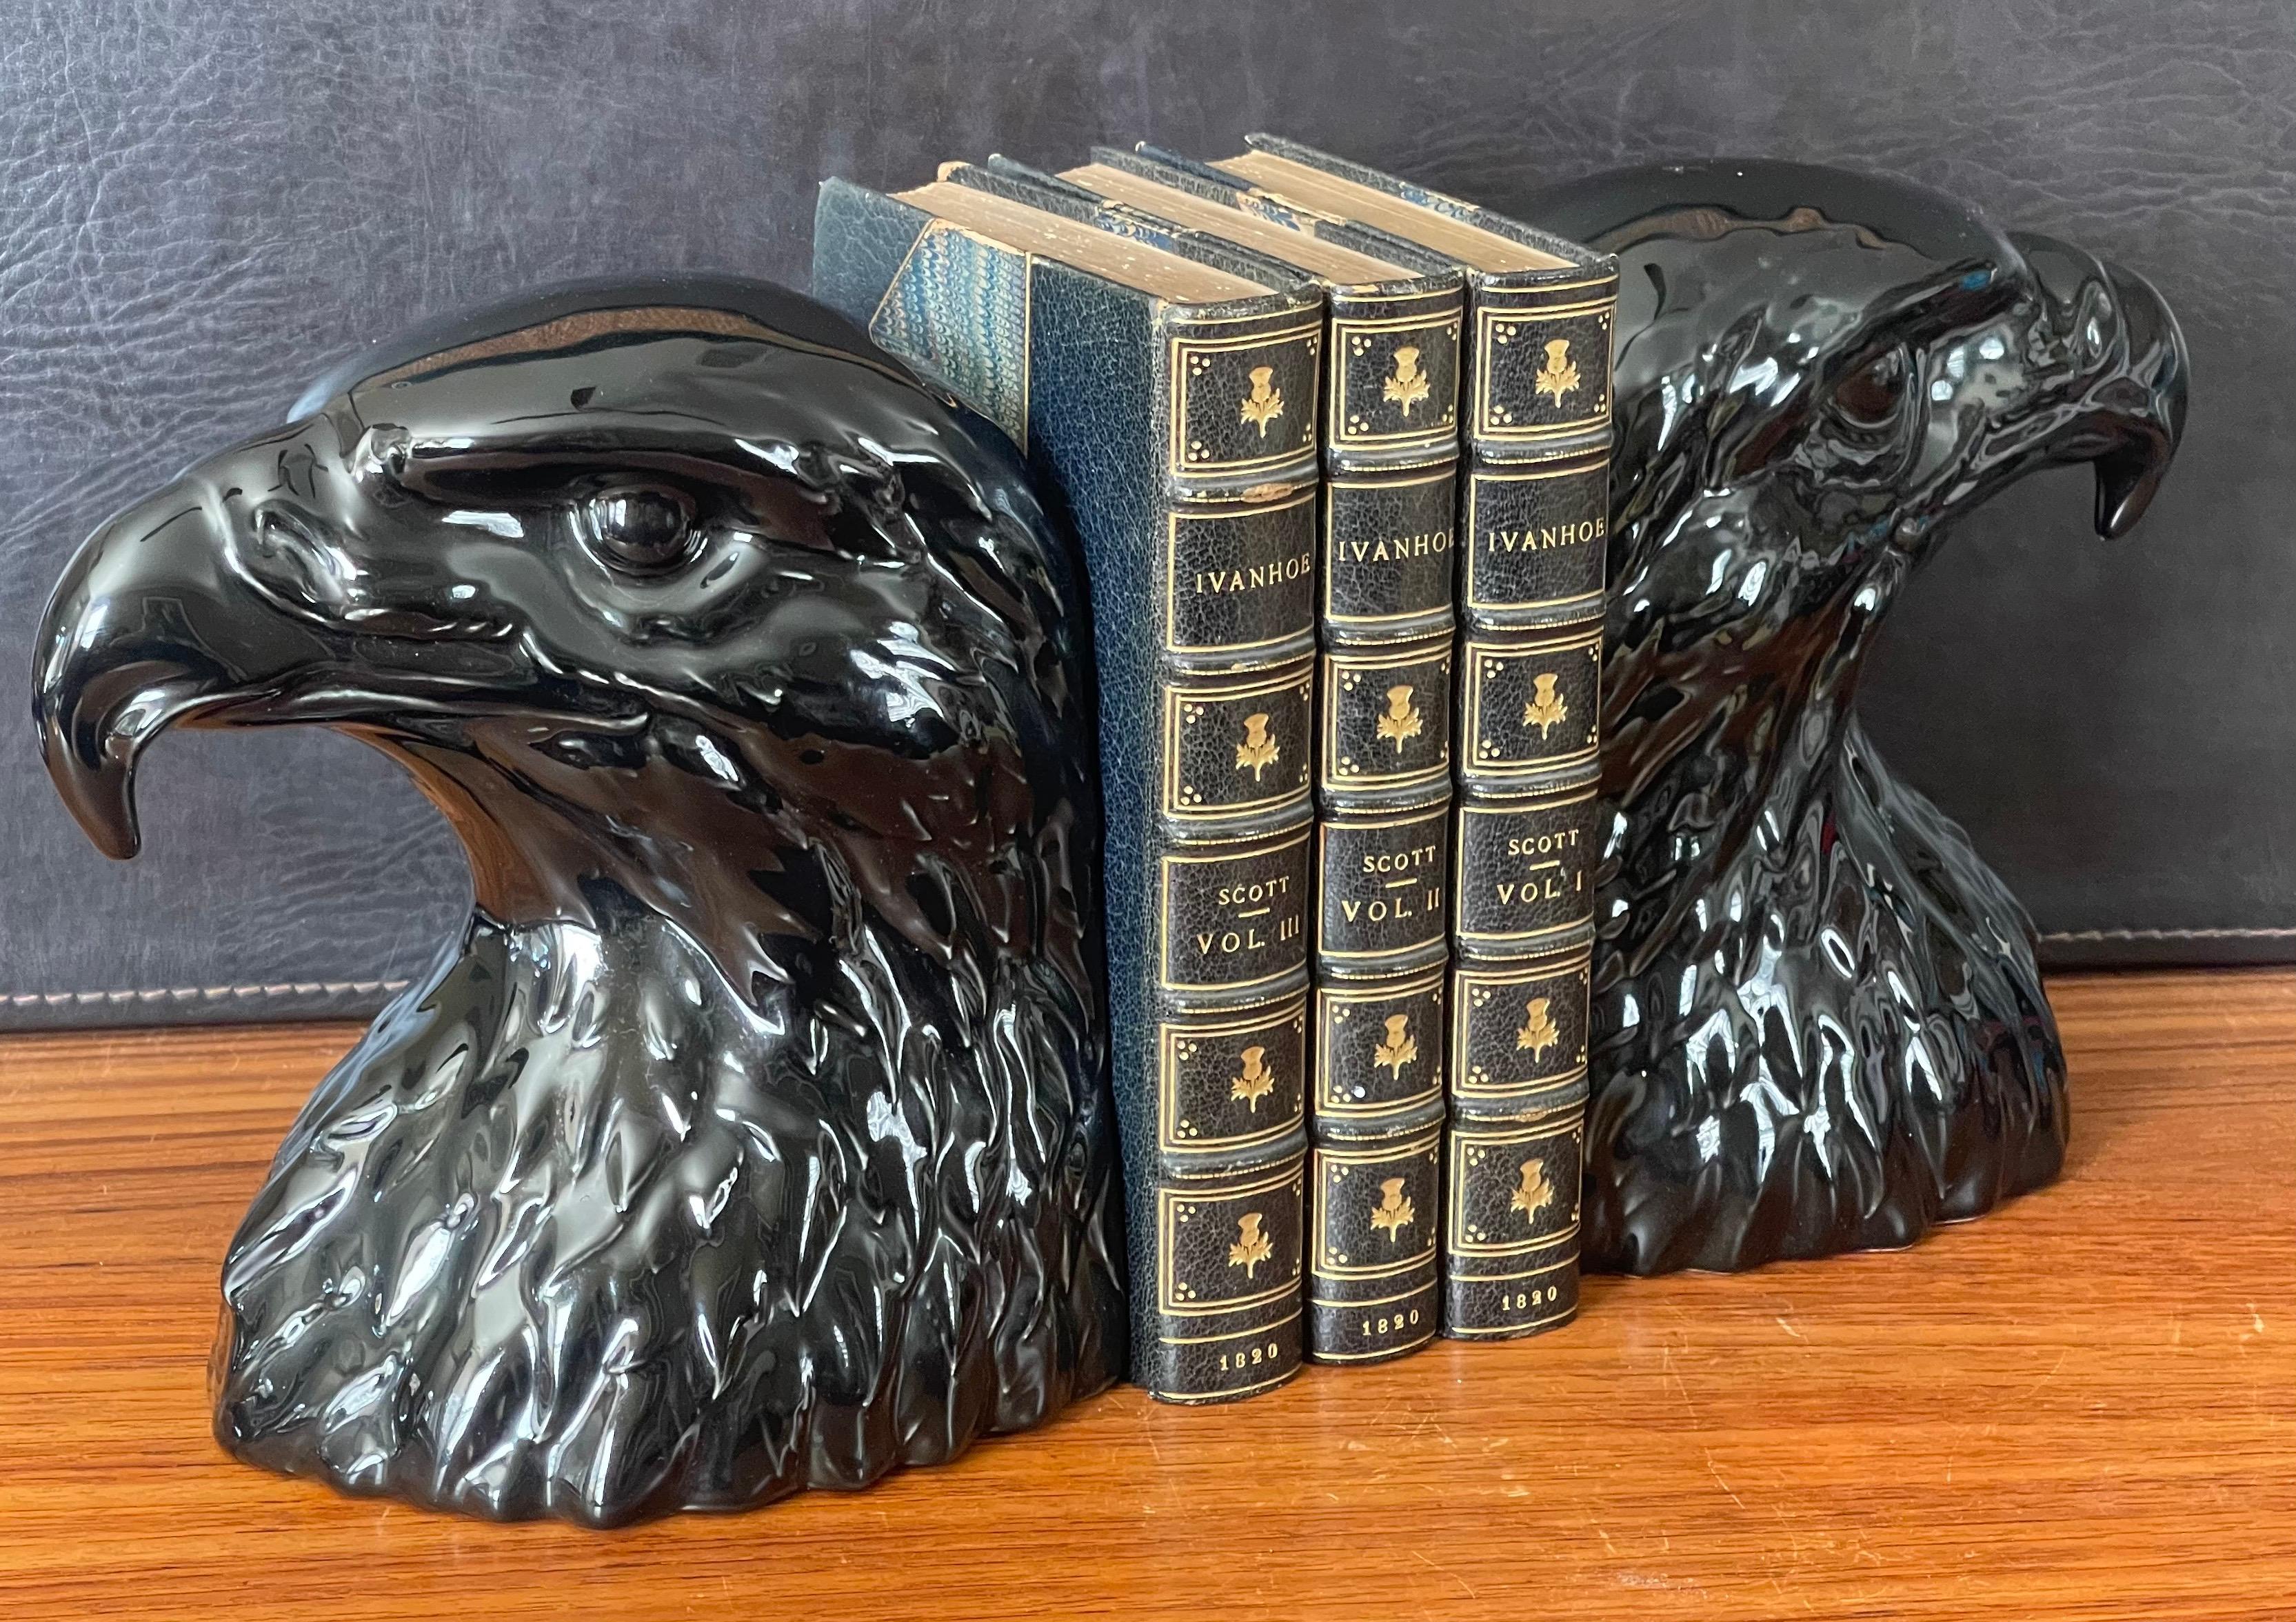 Pair of Glossy Black Porcelain Eagle Head Bookends by Hispania Daiso / LLadro 1